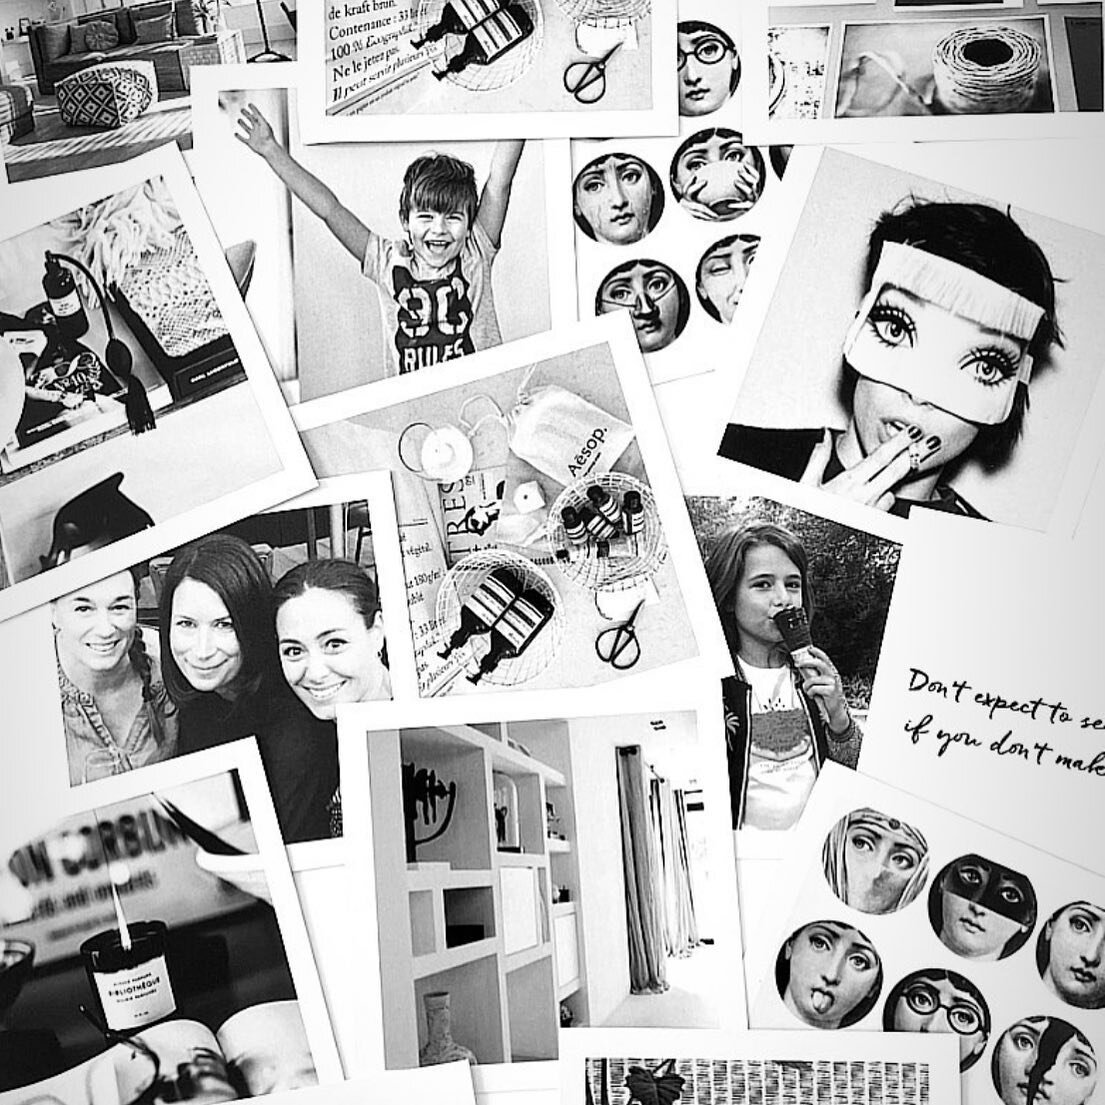 SNAPSHOTS.. 

Are always a photogenic styling item.. 

Since I print so little pictures these days (because they are all on my phone ;) I love Timelapp.. You can choose 10 (or more) pictures every month, which you receive nicely printed in a cute env